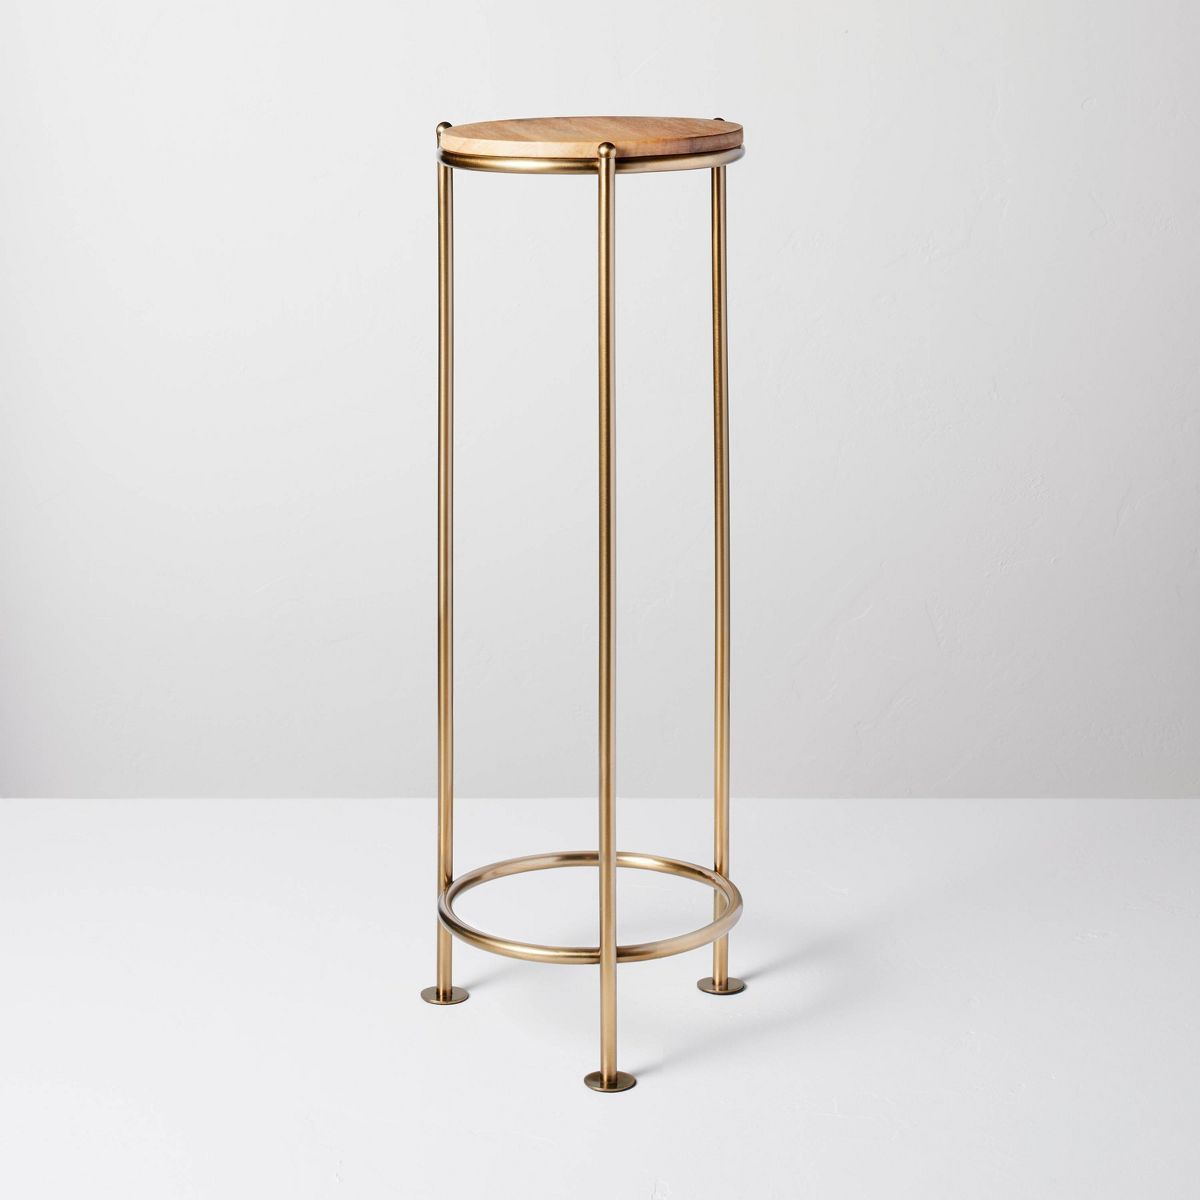 Wood & Brass Round Plant Stand - Hearth & Hand™ with Magnolia | Target